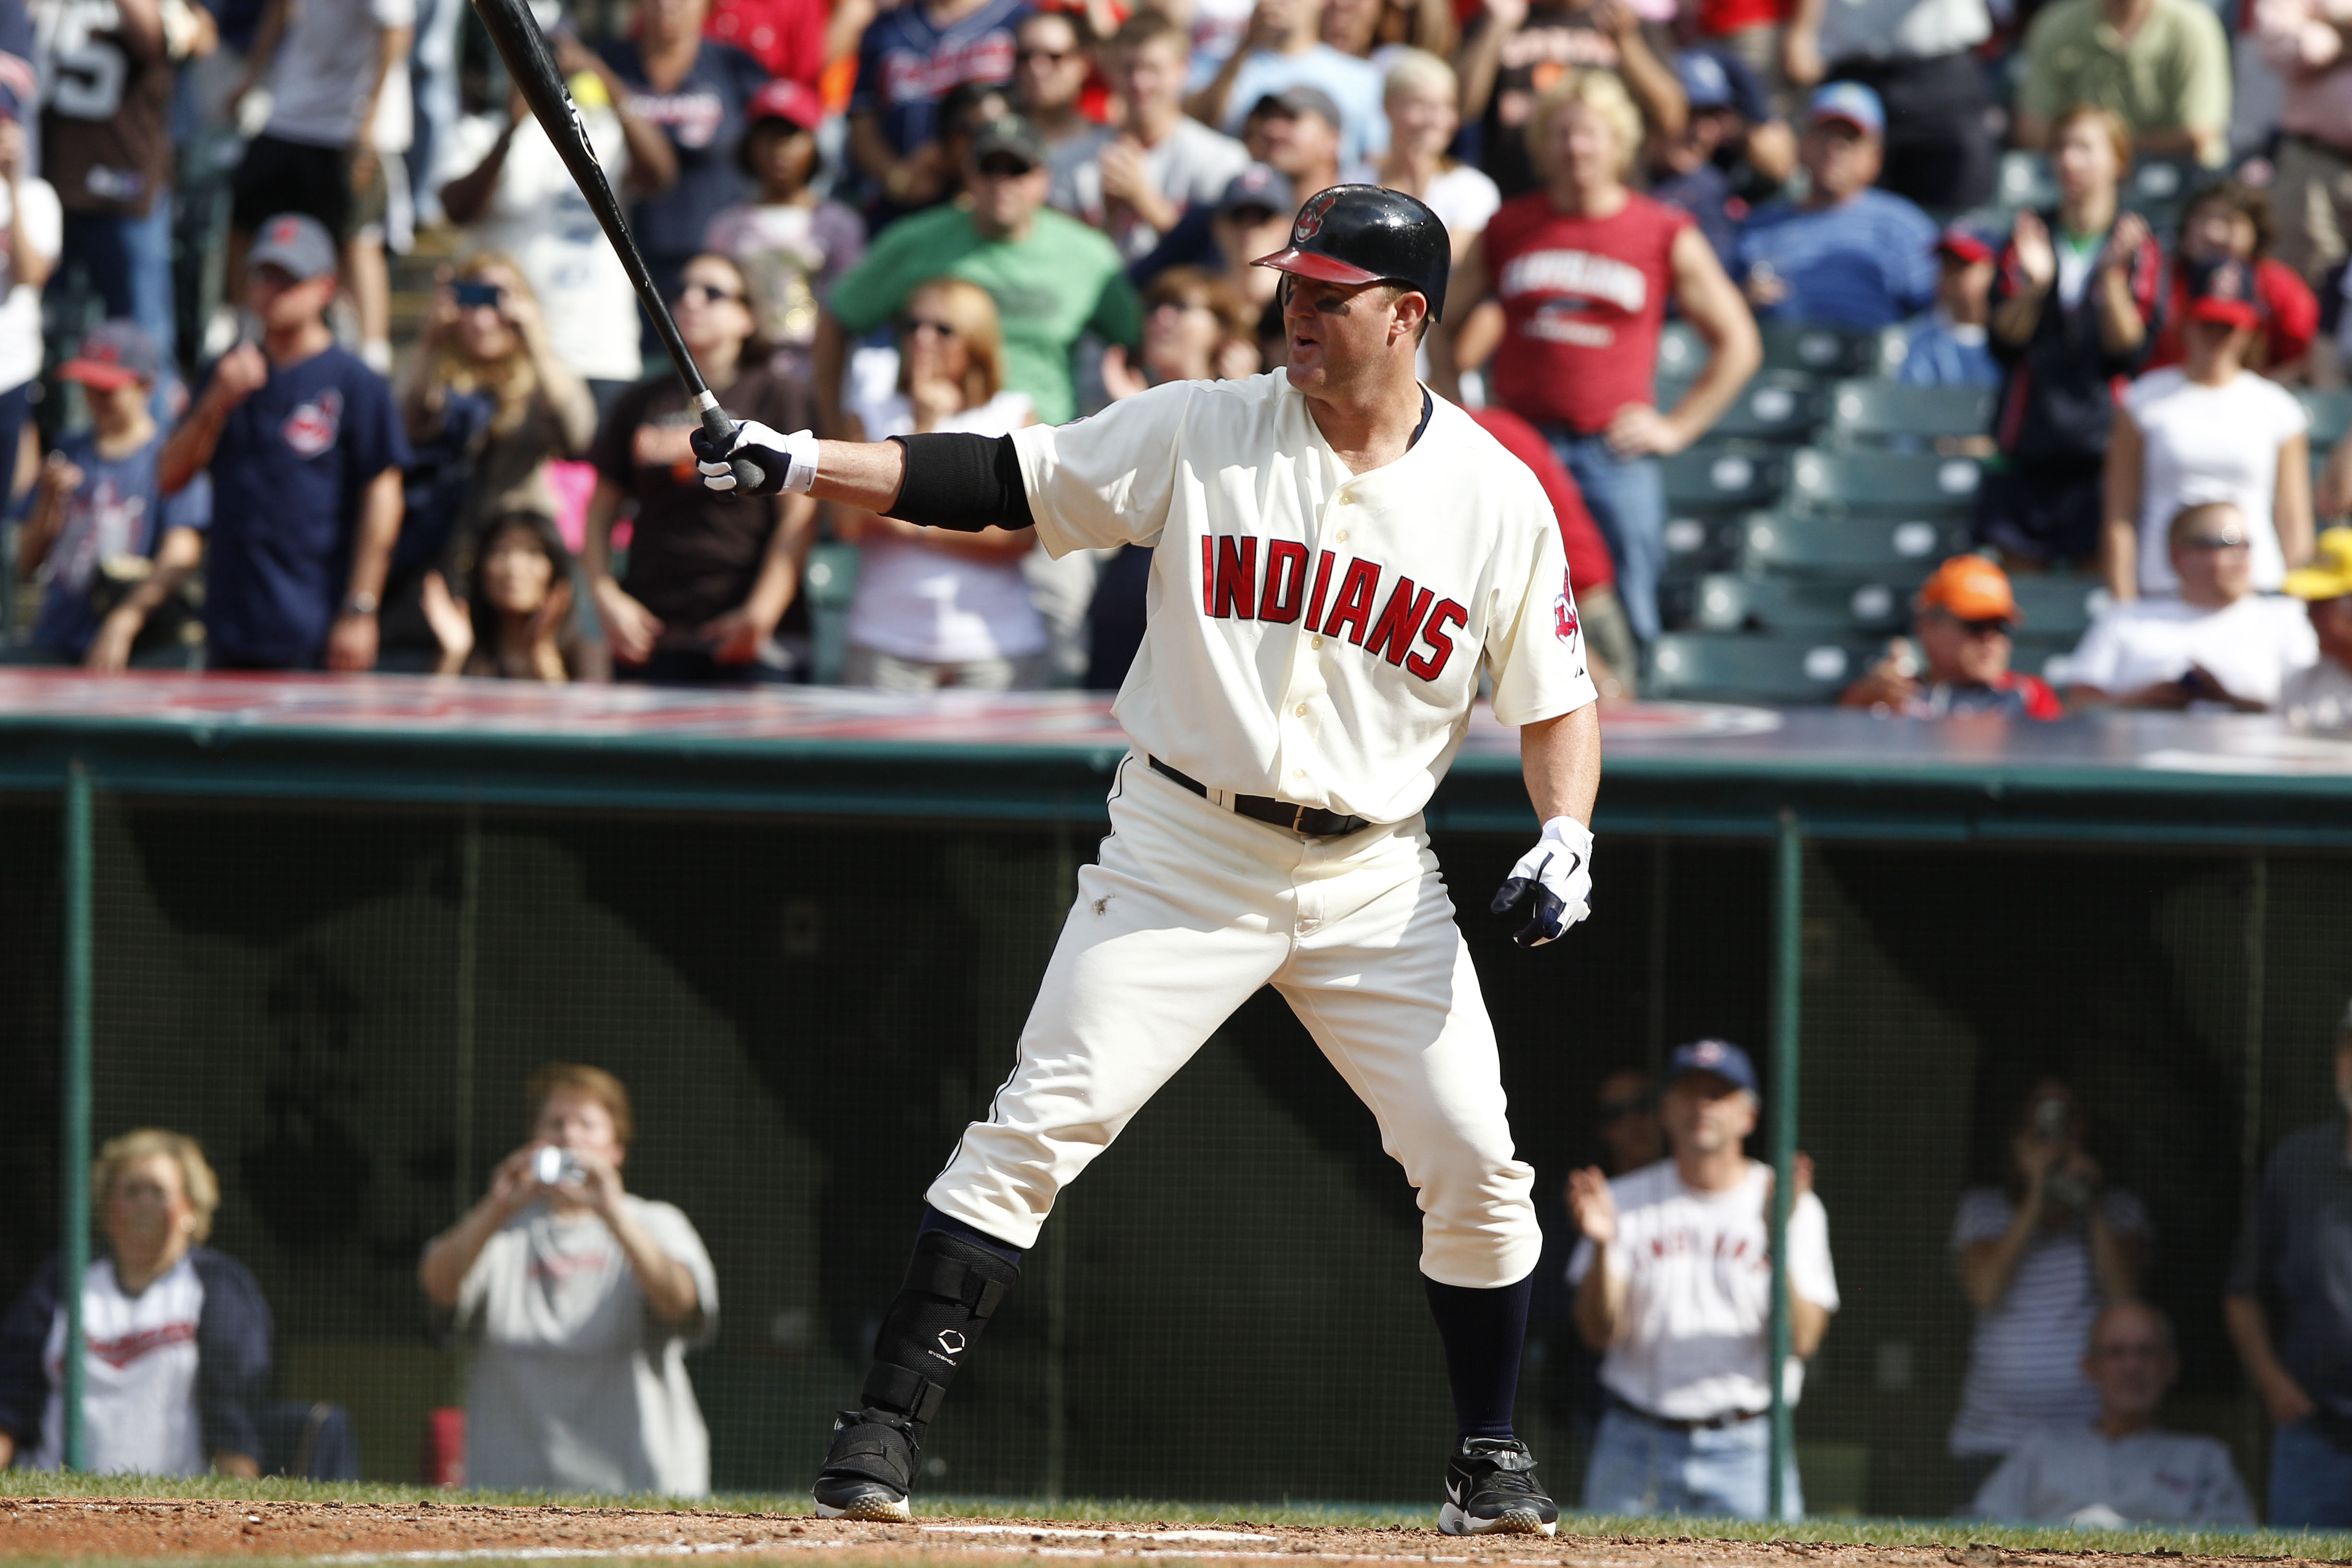 Cleveland Indians great Jim Thome humbled, honored by selection to